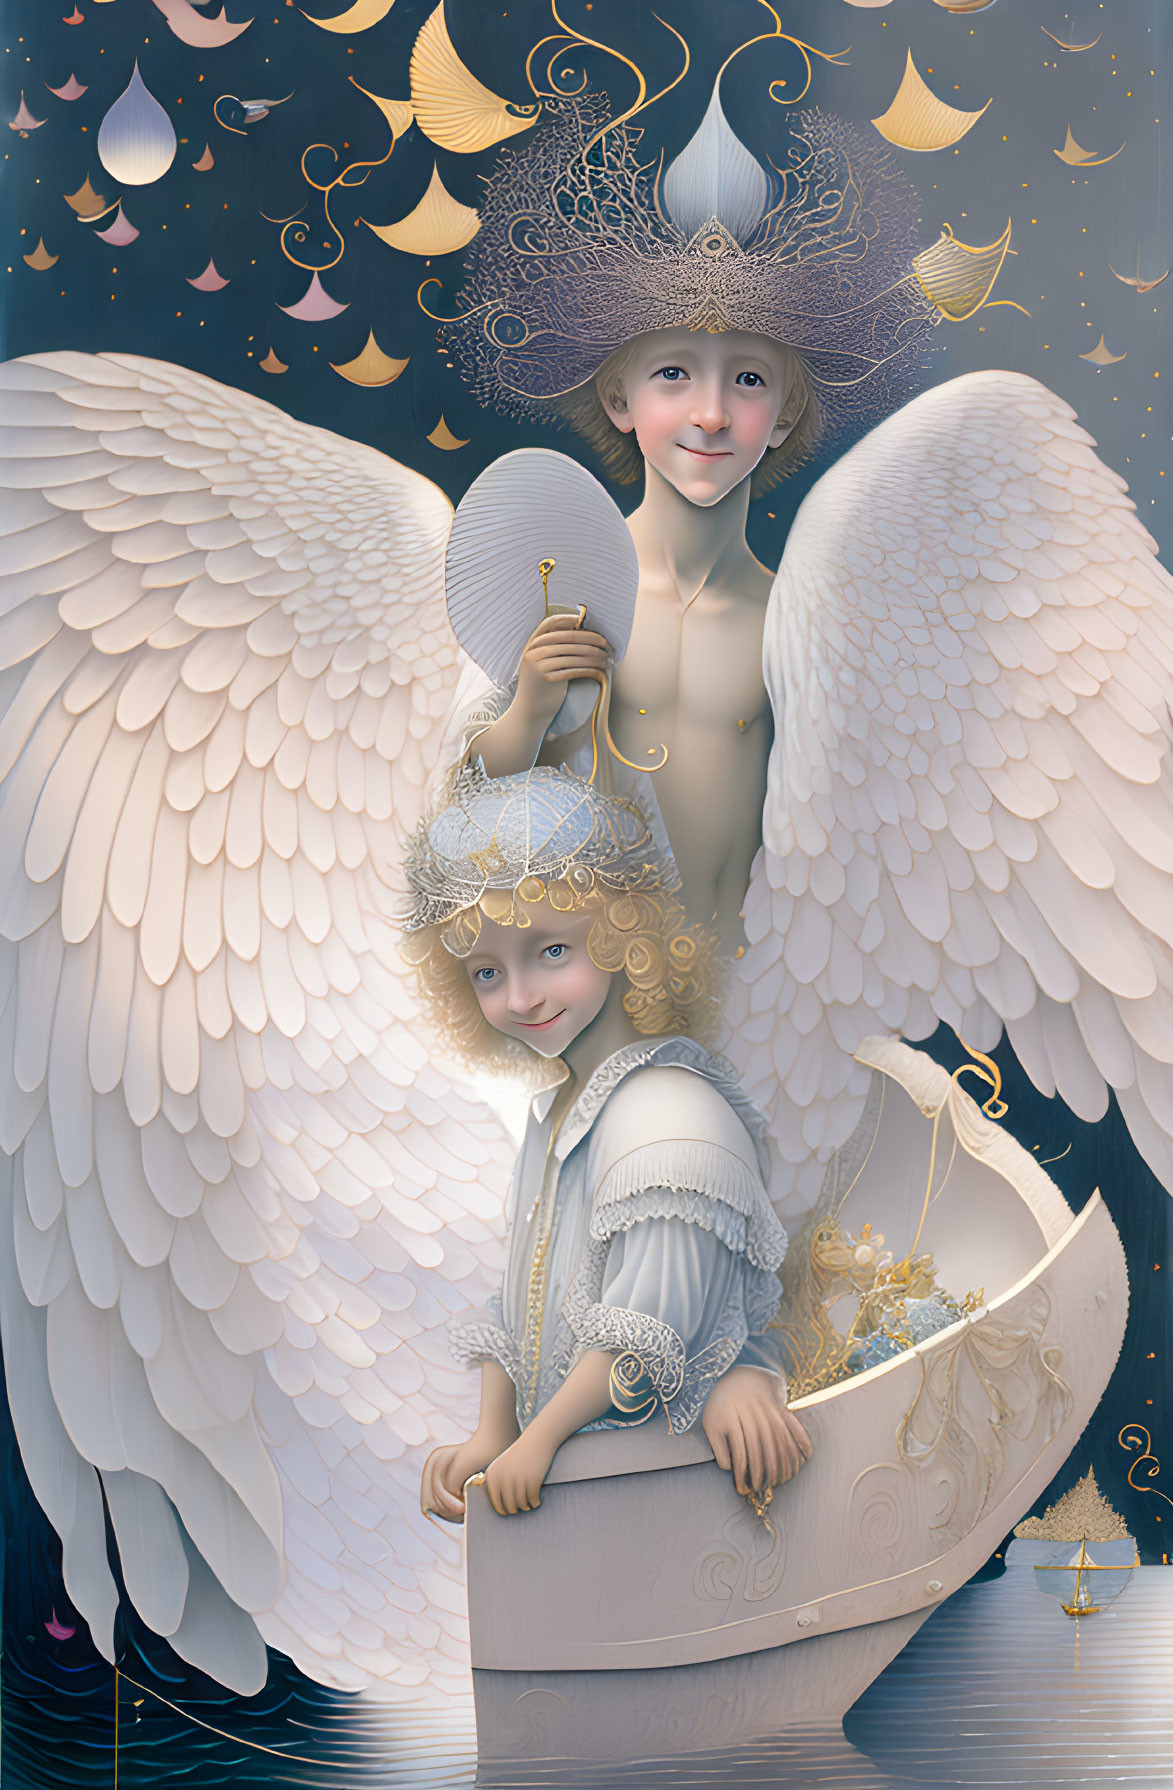 Illustration of two angelic figures with white wings and a golden boat adorned with stars and crescent